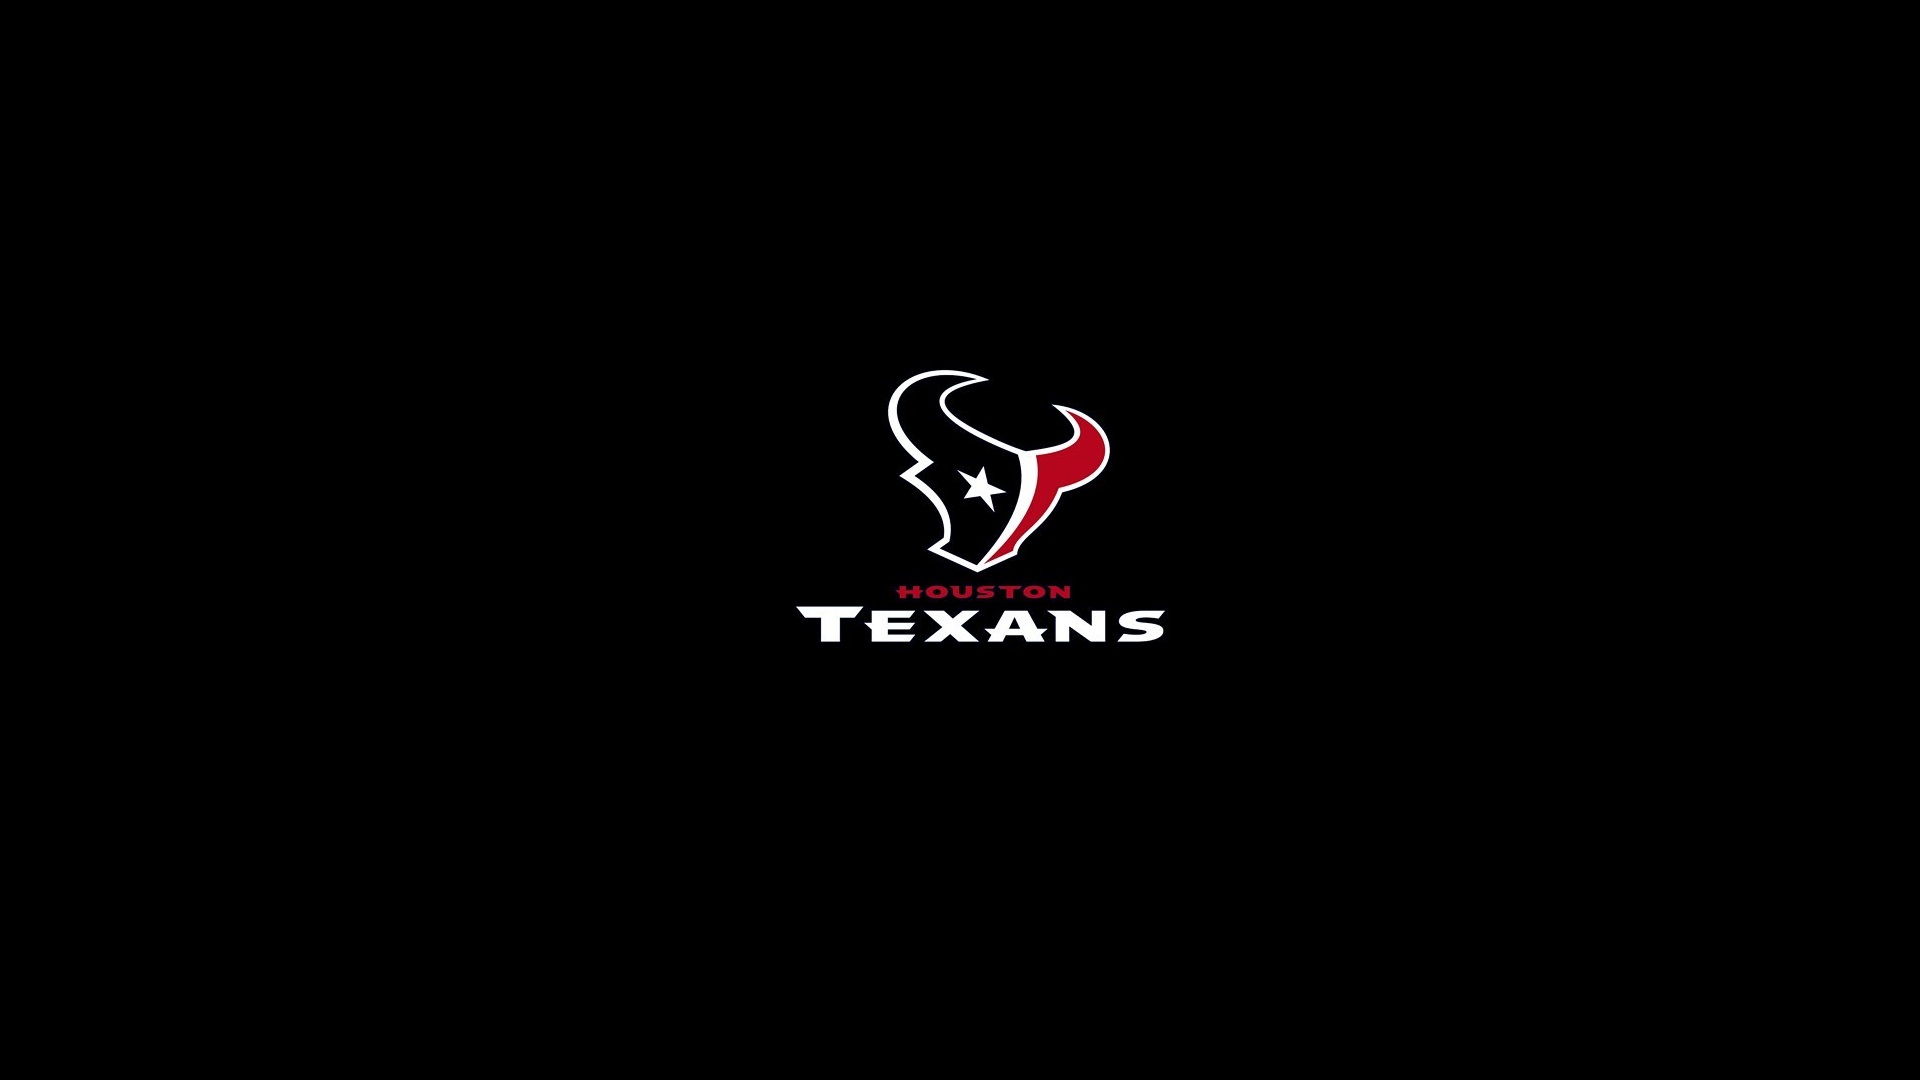 Houston Texans Wallpaper in HD With high-resolution 1920X1080 pixel. Download and set as wallpaper for Desktop Computer, Apple iPhone X, XS Max, XR, 8, 7, 6, SE, iPad, Android